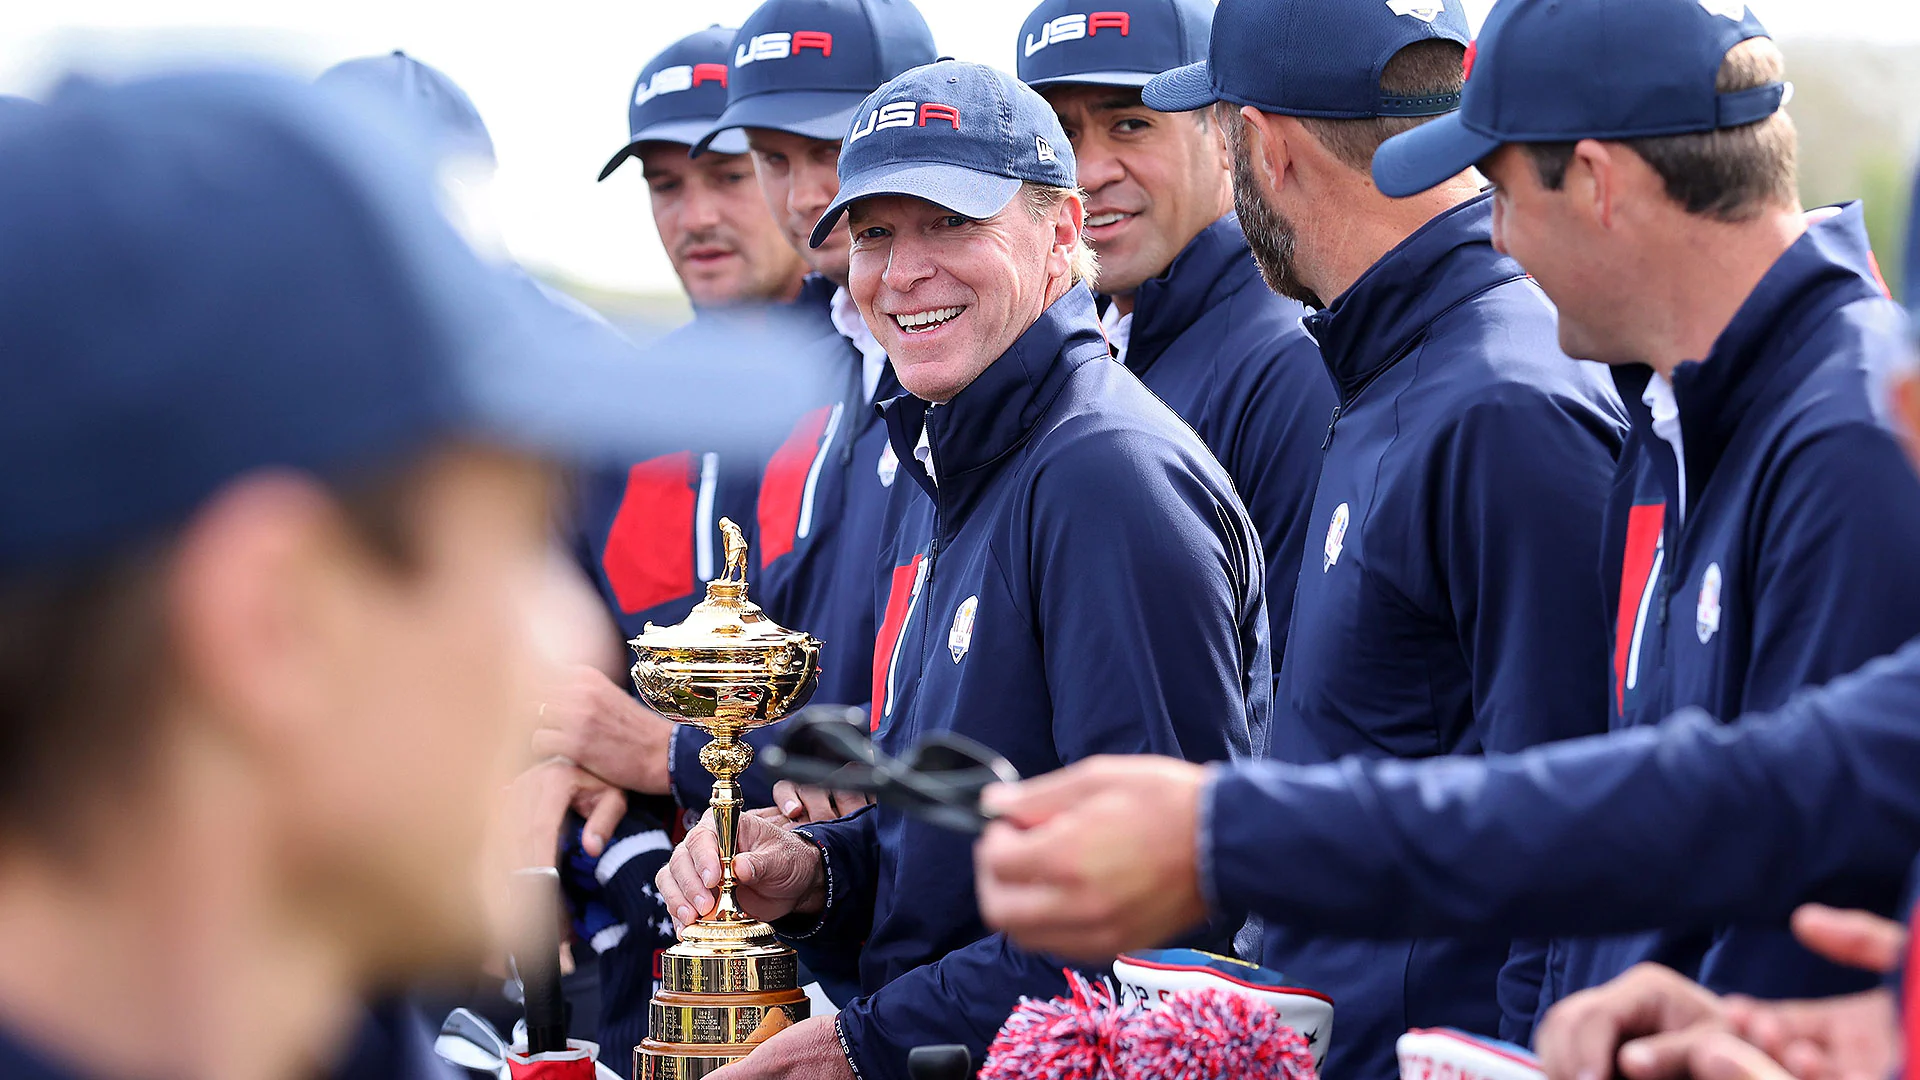 2020 Ryder Cup: Steve Stricker may follow Thomas Bjorn and get tattoo if Team USA wins